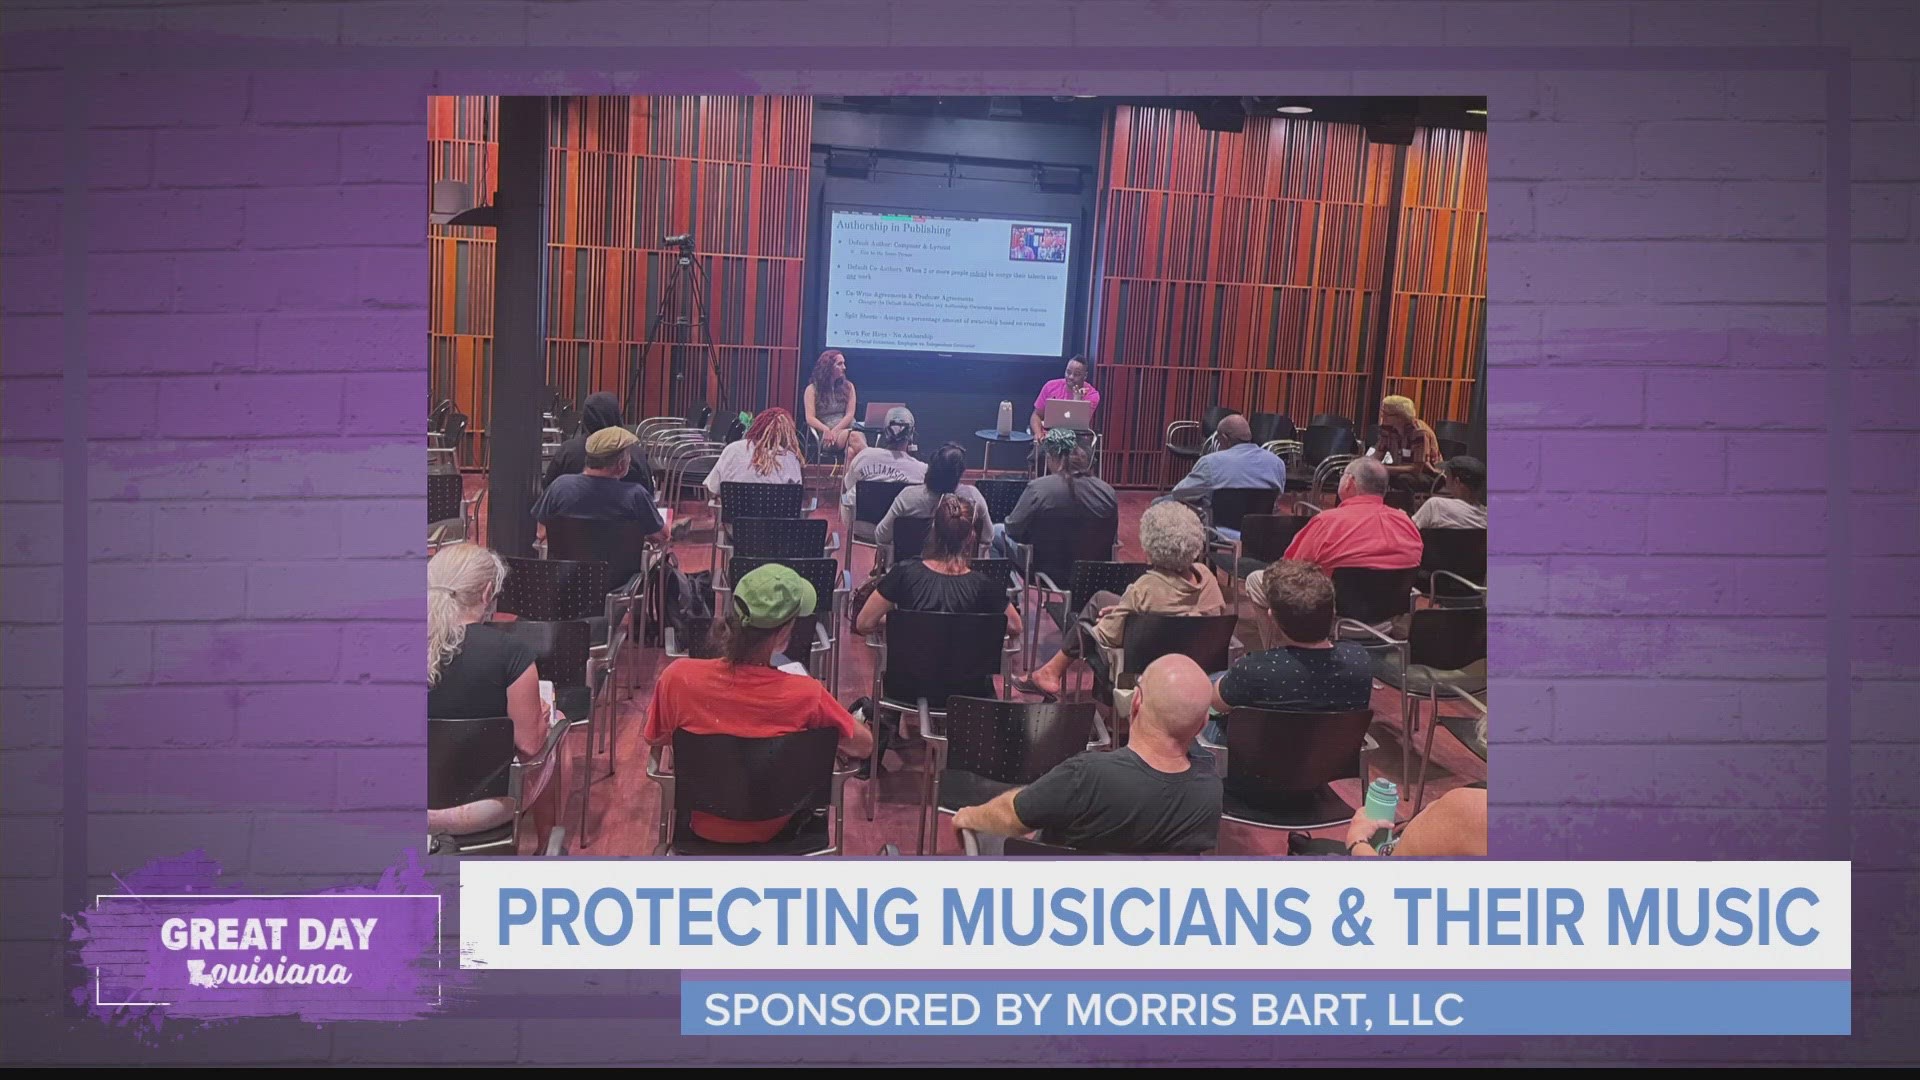 This Impact Giveback segment sponsored by Morris Bart highlights The Ella Project, which provides pro bono legal assistance for local artists.